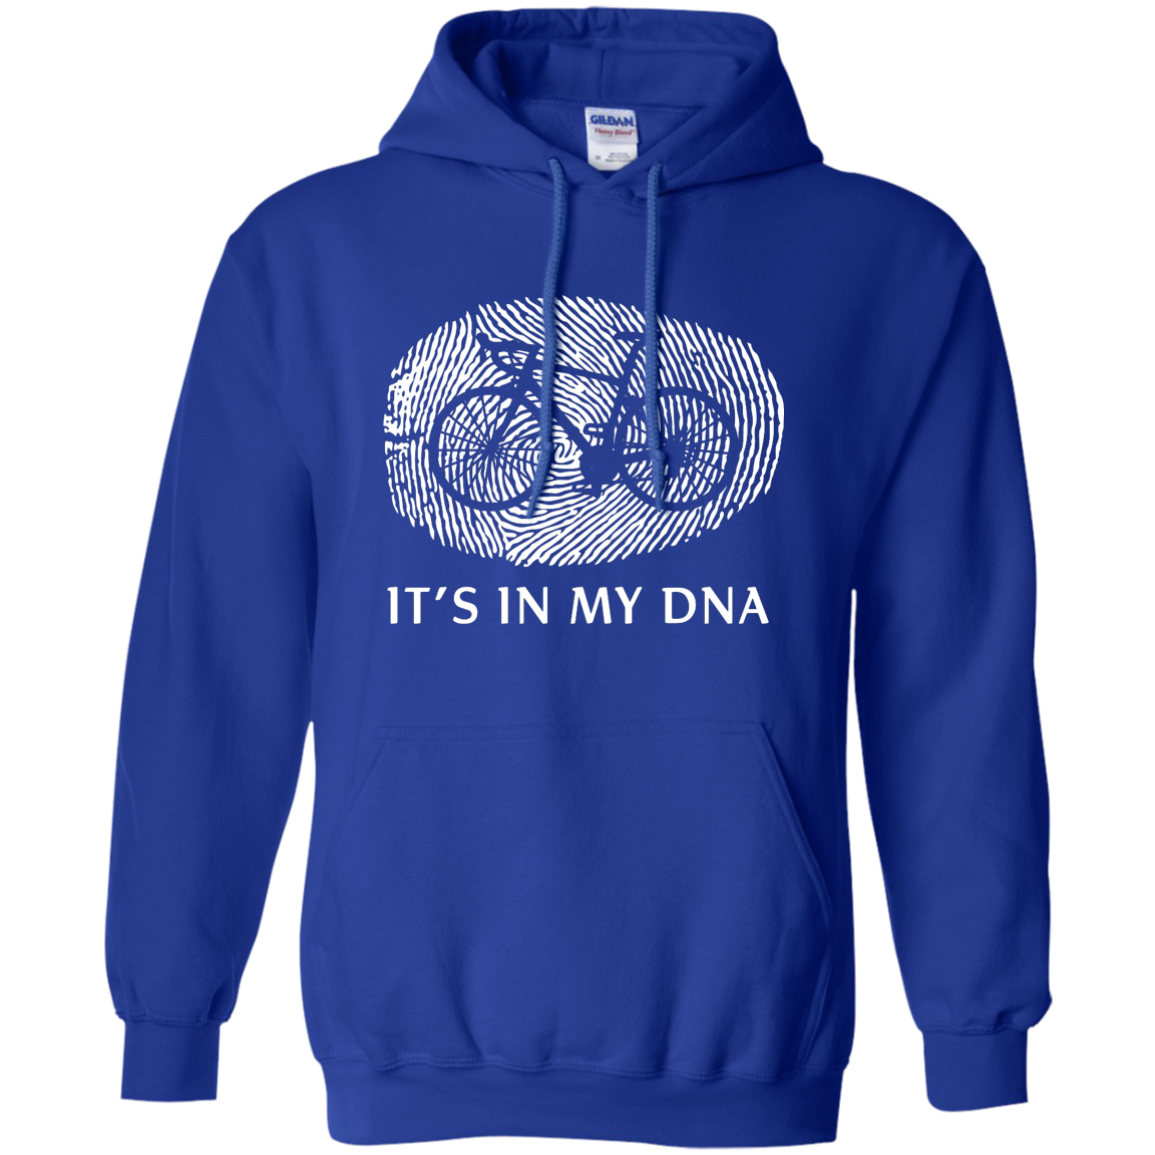 Shopagift Cycling is in My DNA Baby Sleepsuit Romper 